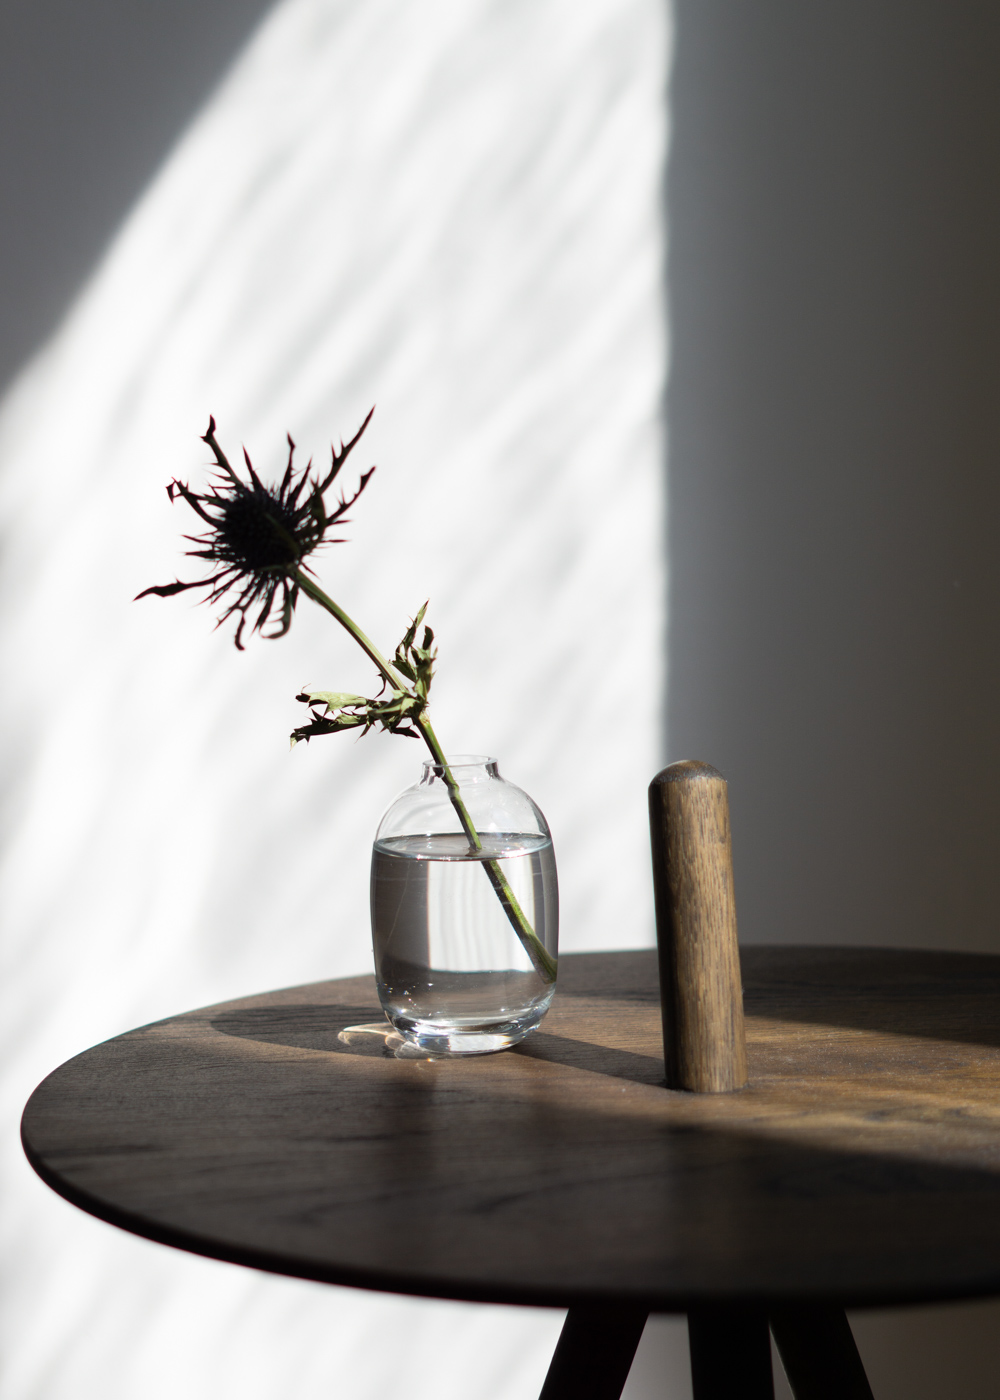 H&M Home, Shadow Play, Small Glass Vase, Woud Come Here Table, Danish Design - Neutral Home, Scandinavian Interior, Natural Aesthetic, Minimalist Decor, Beige Style, RG Daily Blog